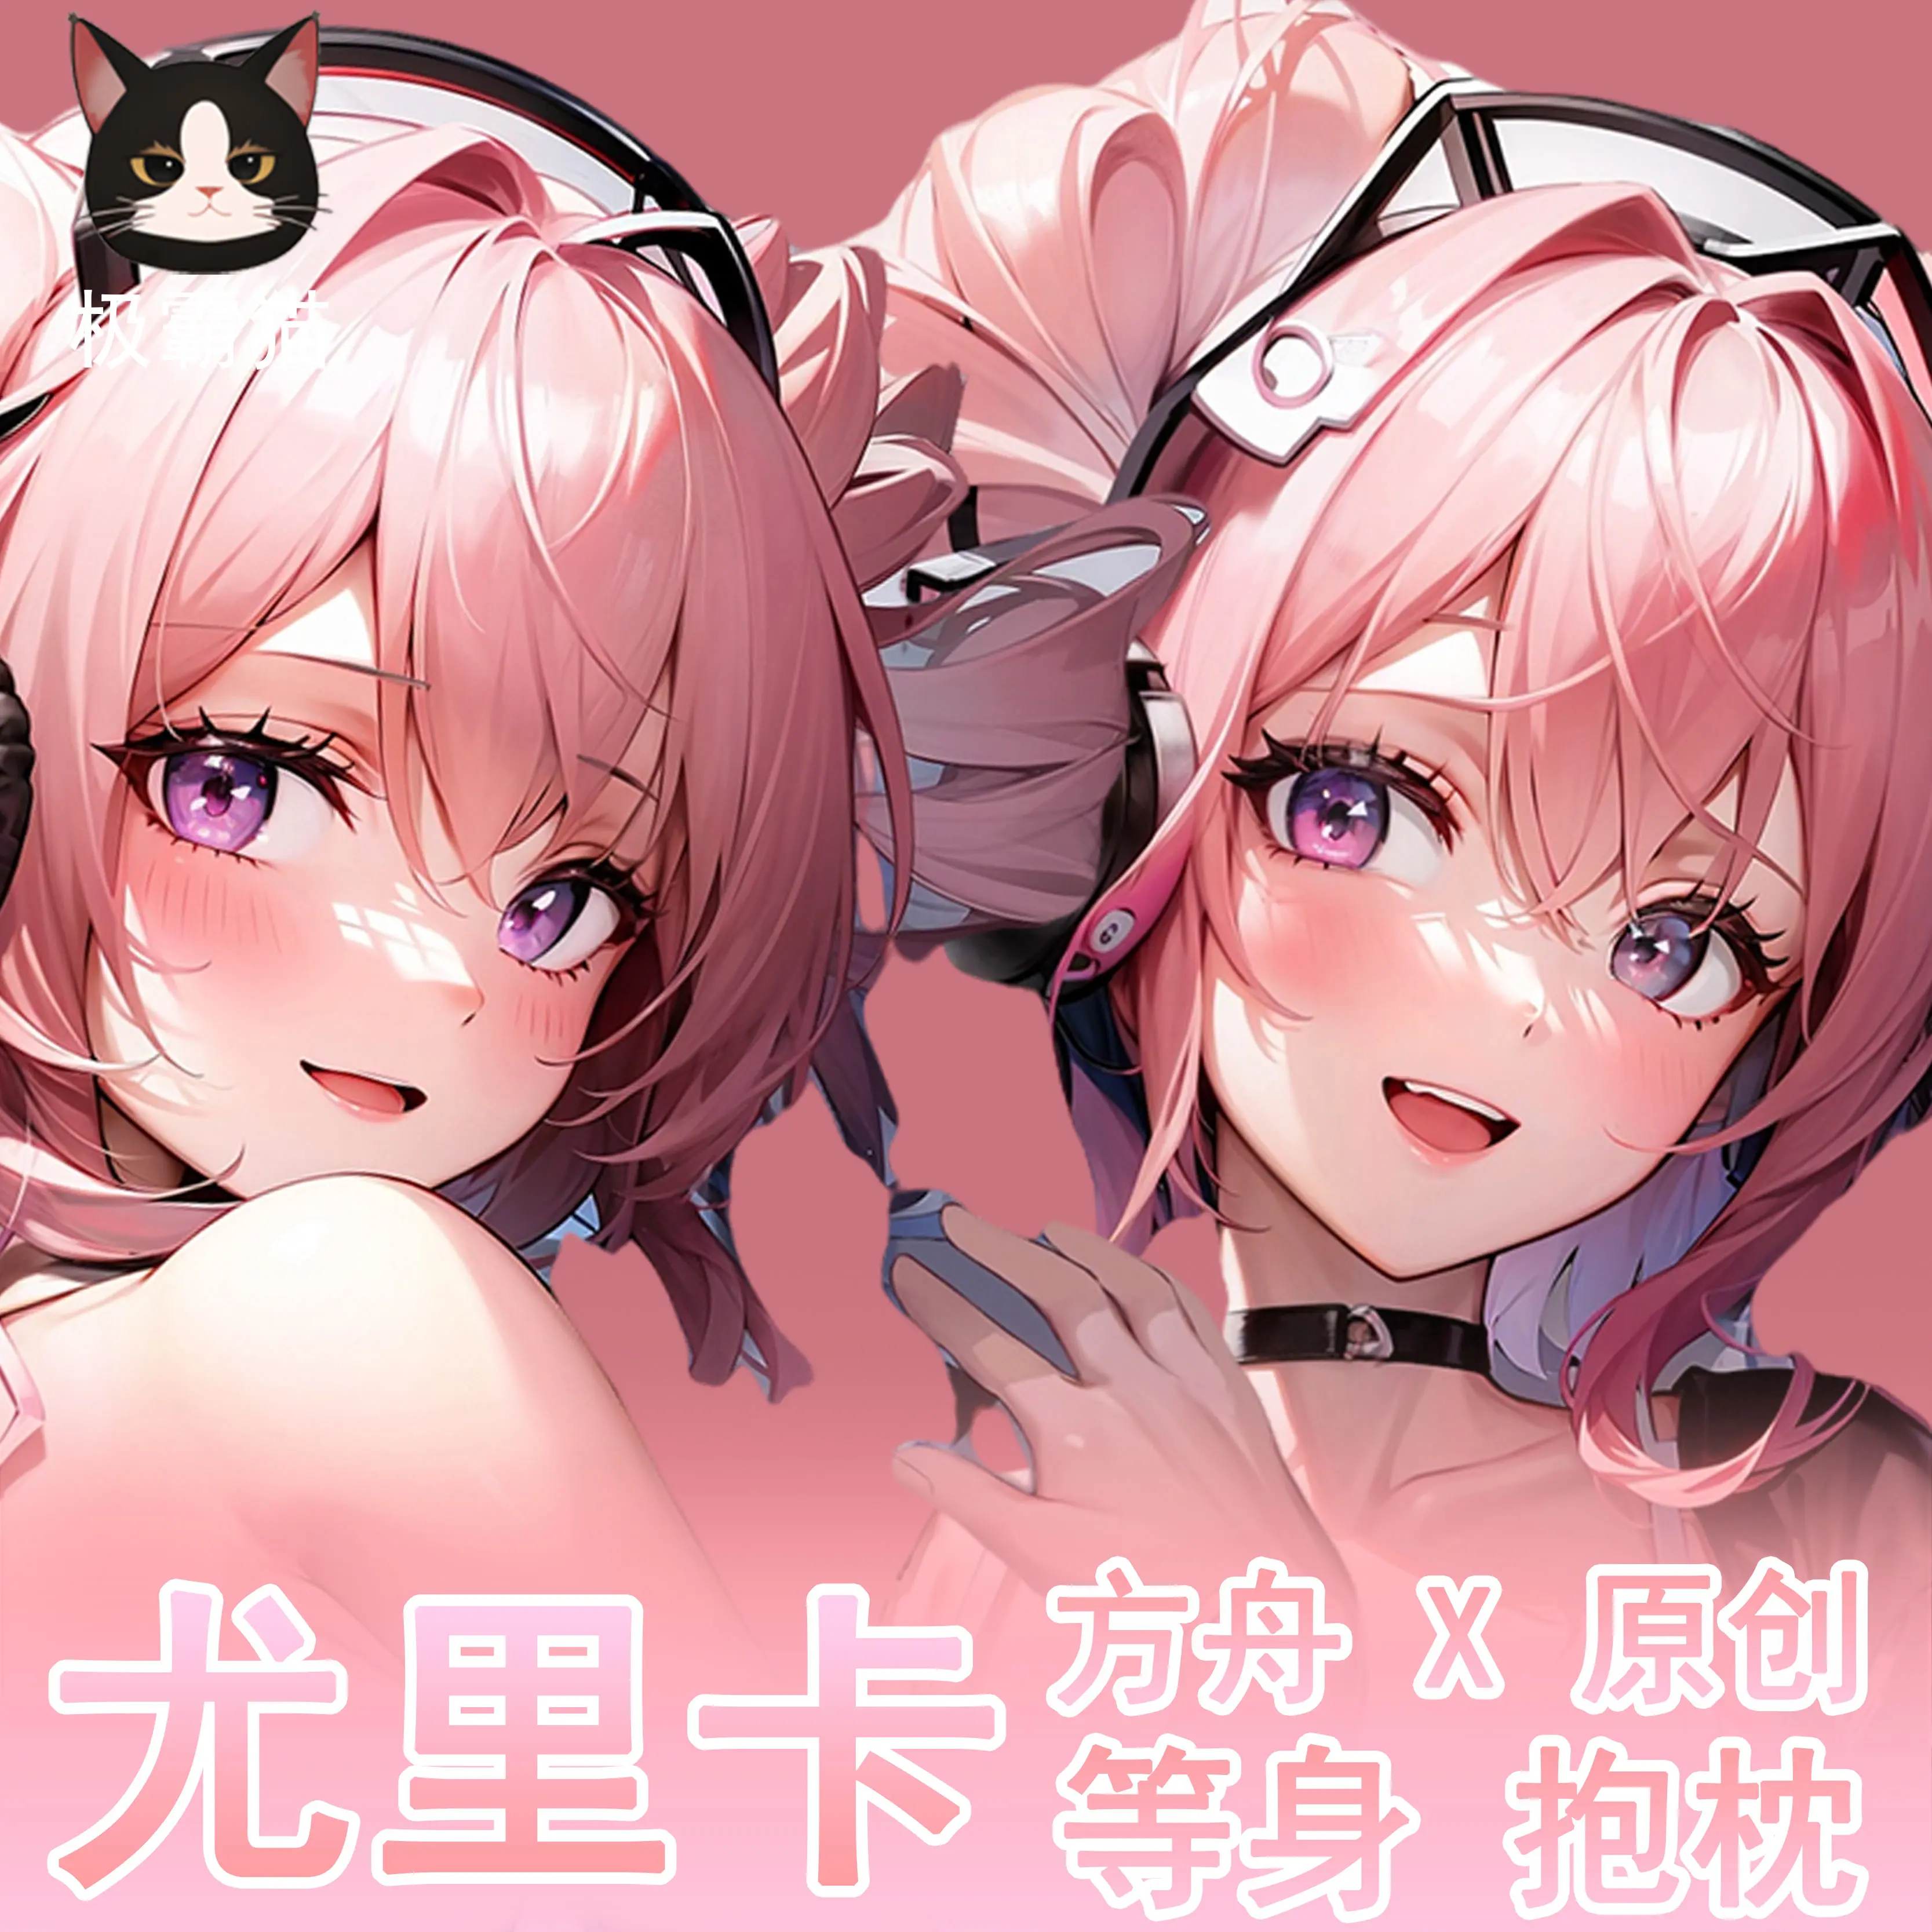 

Game Anime Peripheral U-official Arknights Cosplay Sexy Dakimakura Hugging Body Pillow Case Otaku Cushion Cover Collection Gift